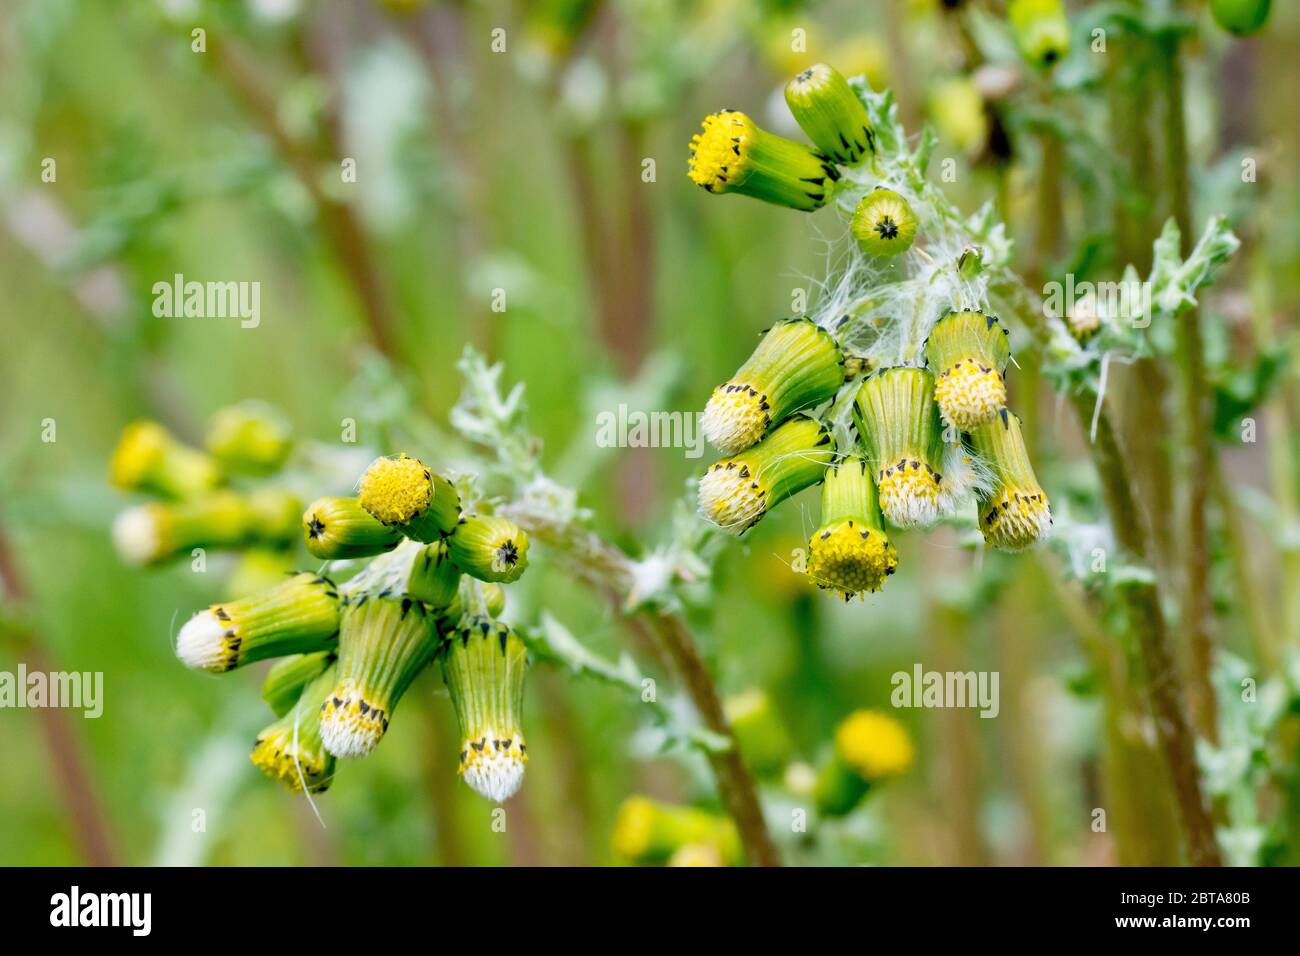 Groundsel (senecio vulgaris), close up of a couple of clusters of flower heads showing flowers, buds and unopened seed heads. Stock Photo